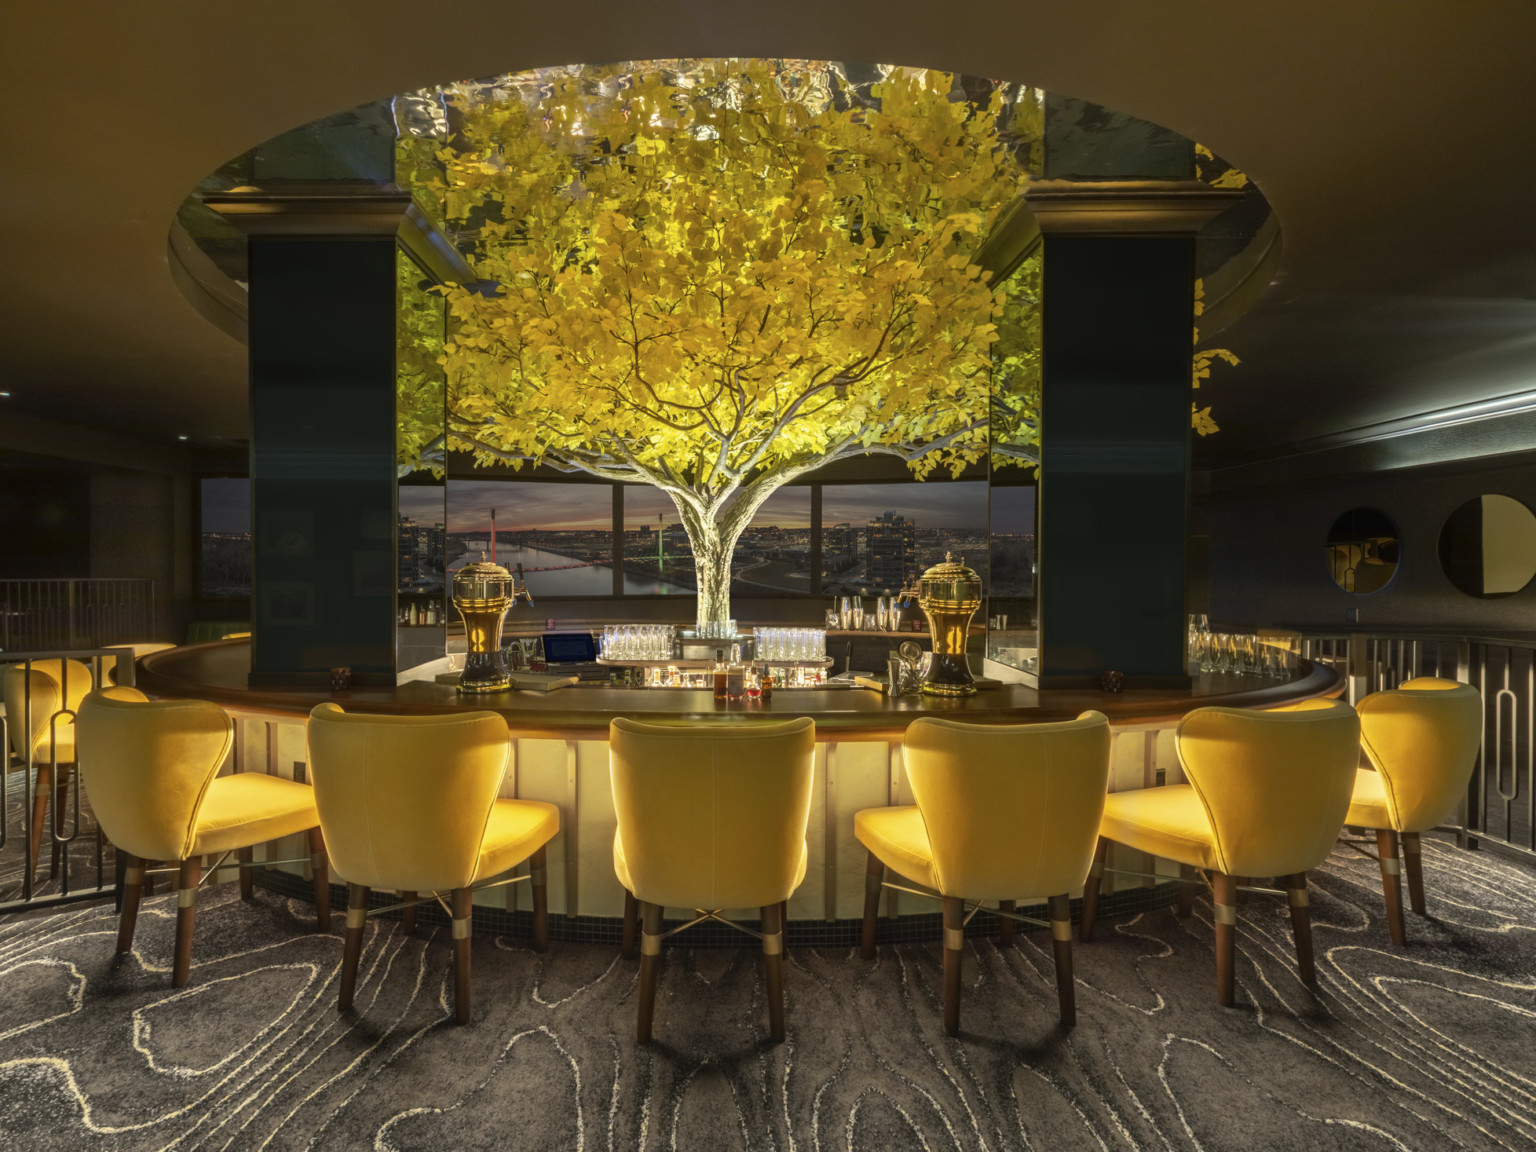 an illuminated yellow tree in the midst of in the round high top bar with yellow seats. Tree rises above round ceiling cutout